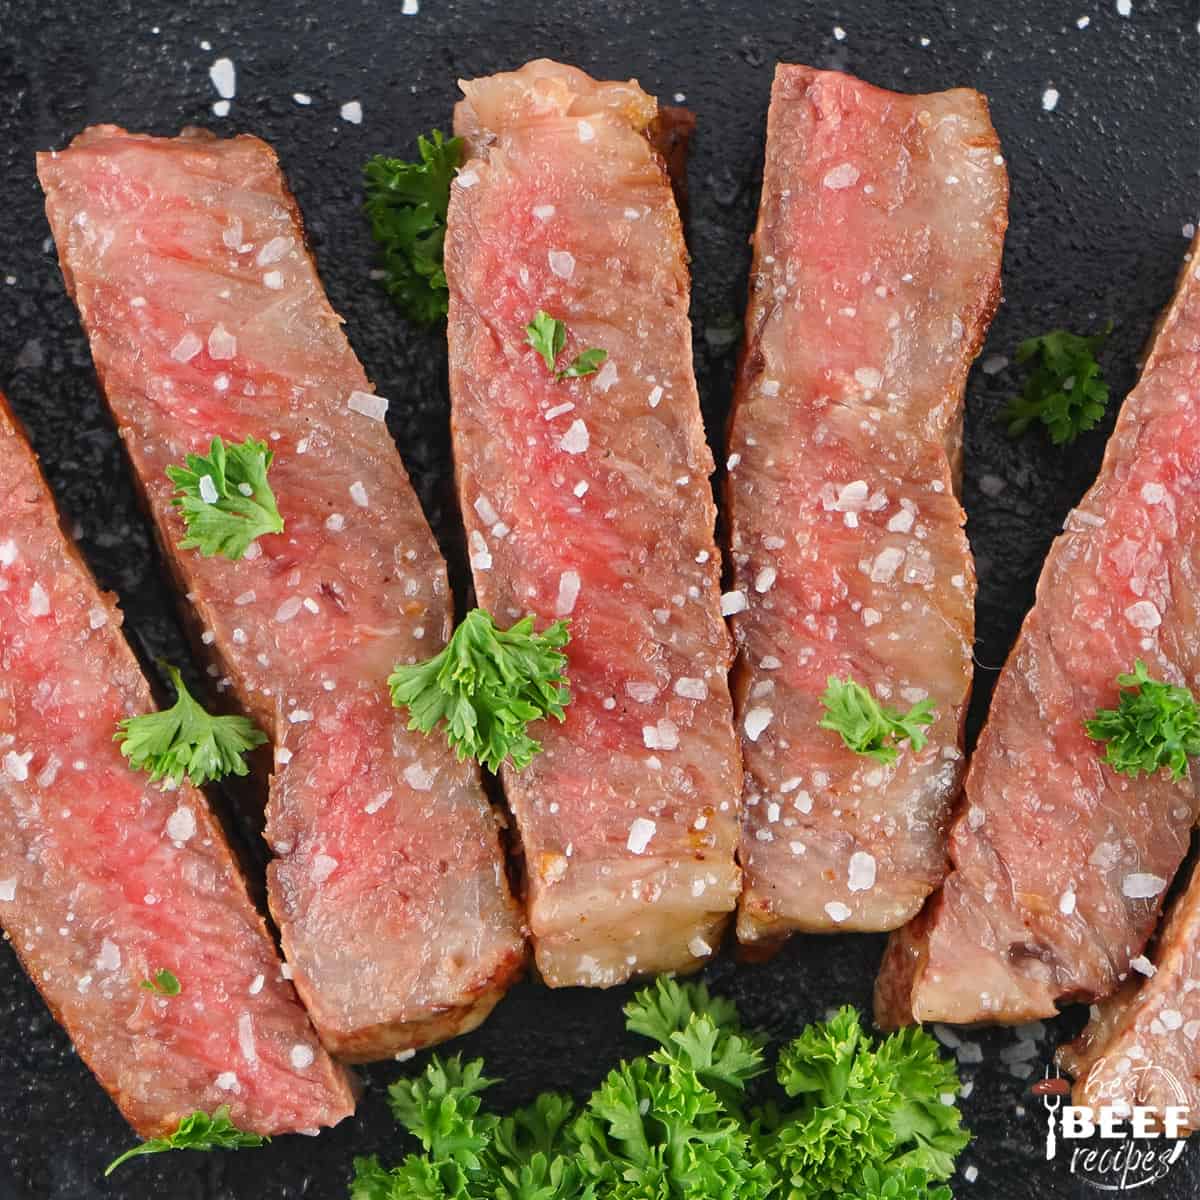 slices of gorgeous medium-rare steak on a black background with coarse salt and parsley